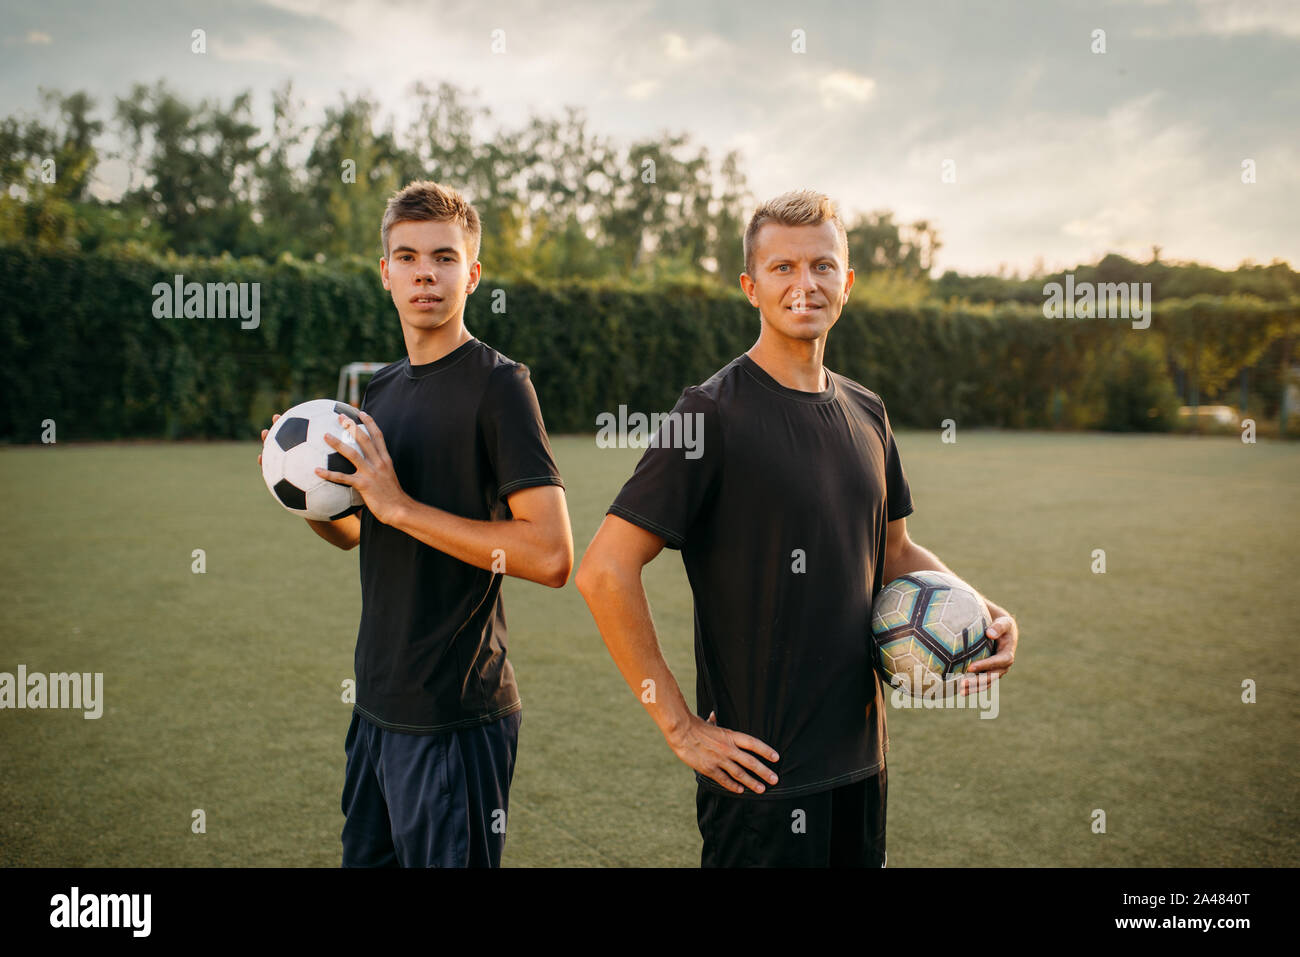 Two male soccer players holding balls in hands Stock Photo